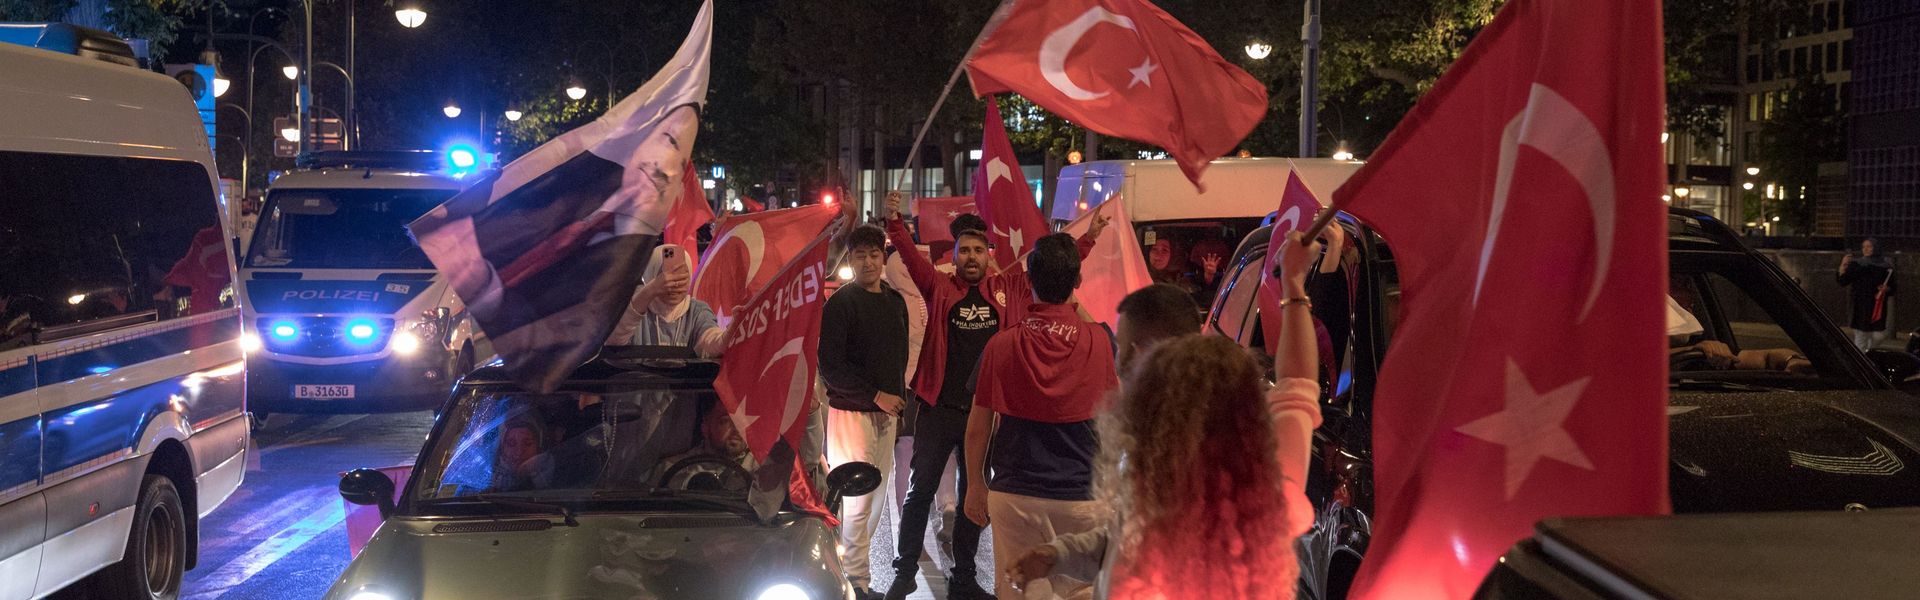 On May 28, 2023, Turkish people in Germany celebrated as Recep Tayyip Erdogan won Turkeys presidential election, extending his rule into a third decade.